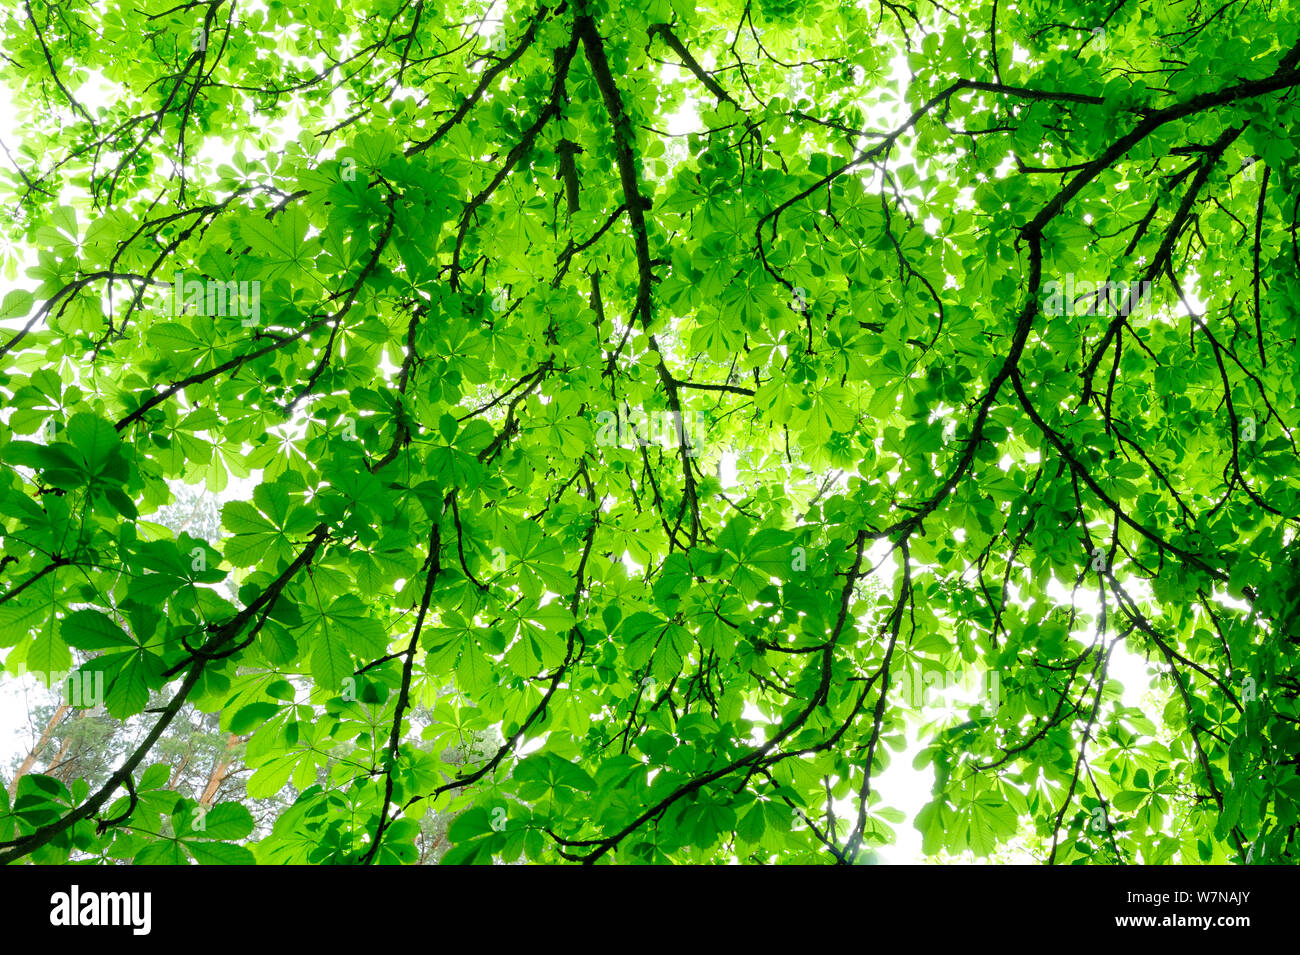 European Beech (Fagus sylvatica) leaves in spring, Serrahner Buchenwald National Park, Germany, UNESCO World Natural Heritage Site, May Stock Photo